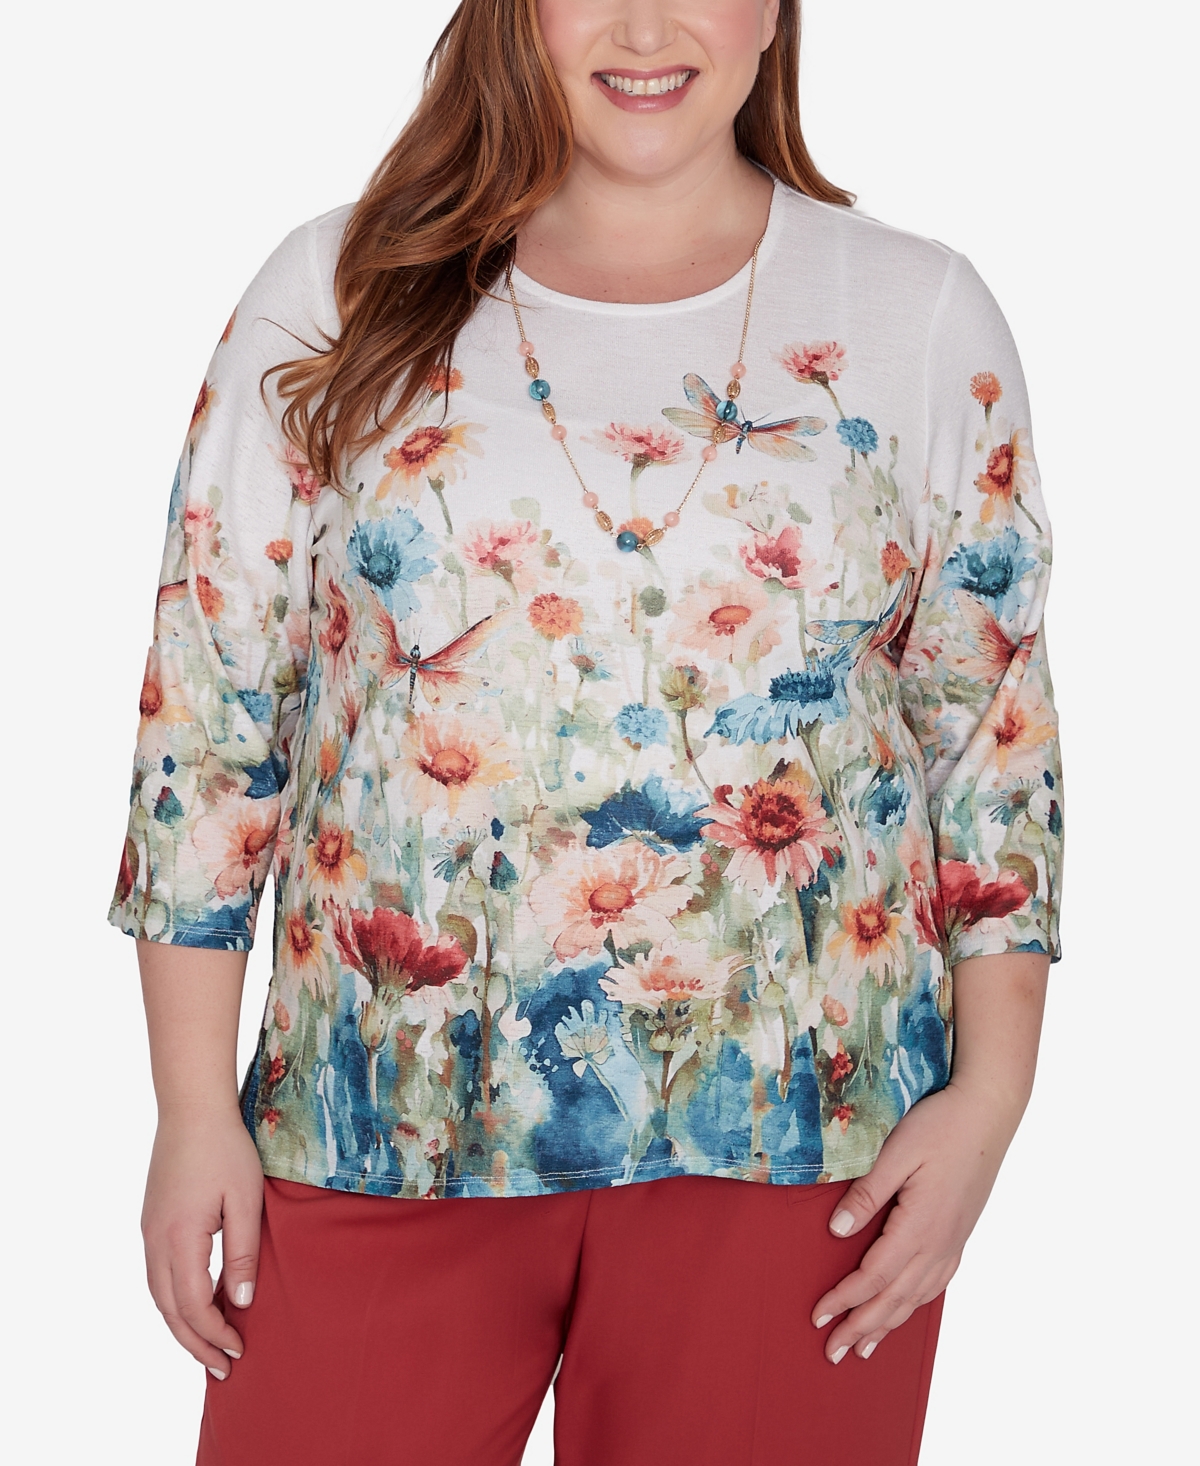 Plus Size Sedona Sky Dragonfly Top With Necklace - Multi